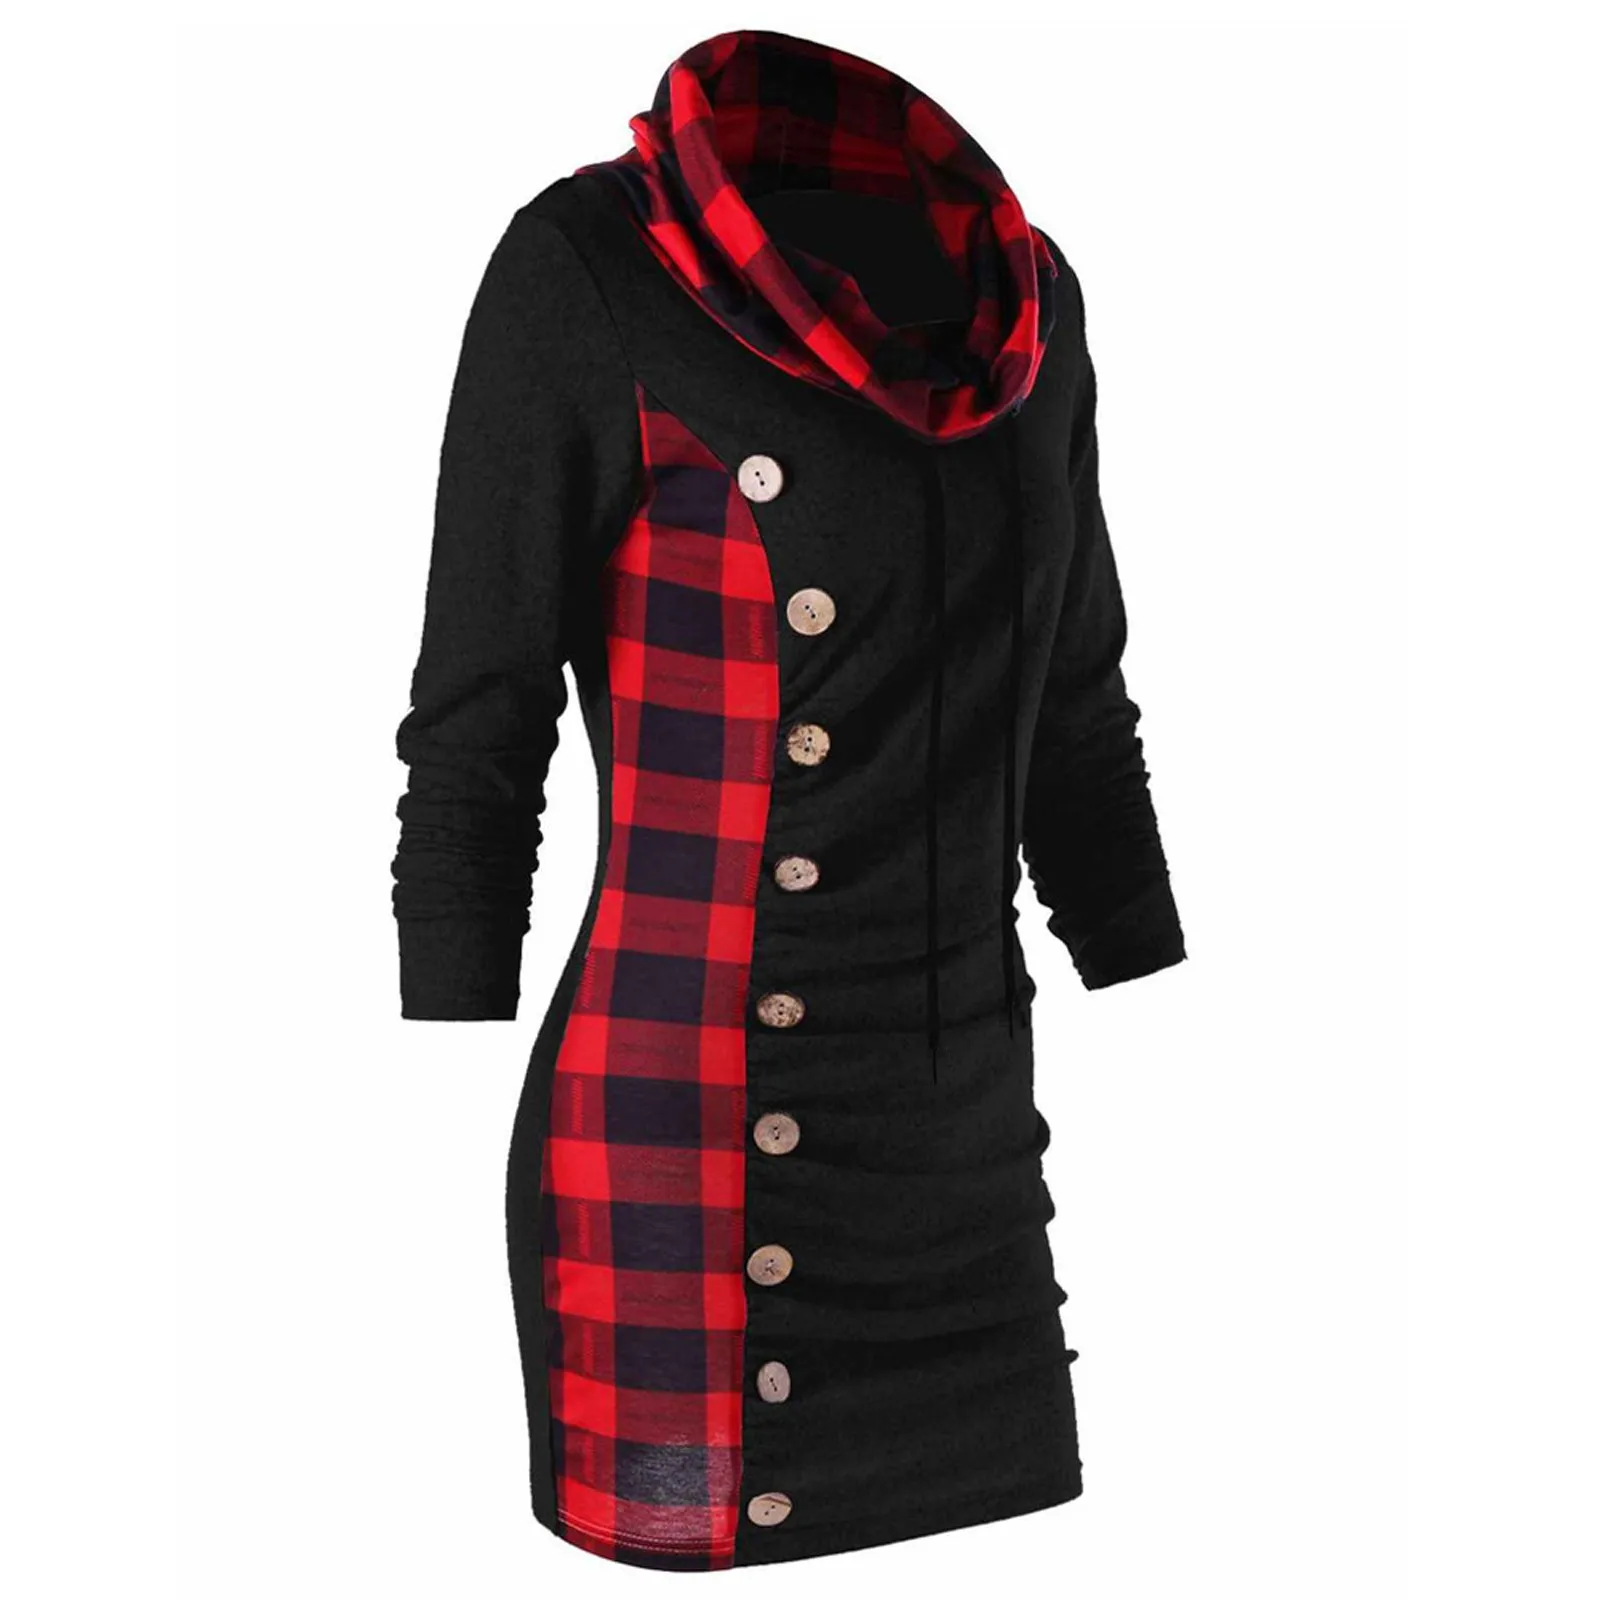 Plaid Long Sleeve Casual Ladies England Style Daily Slim Warm Women Dress With Scarf Collar Buttons